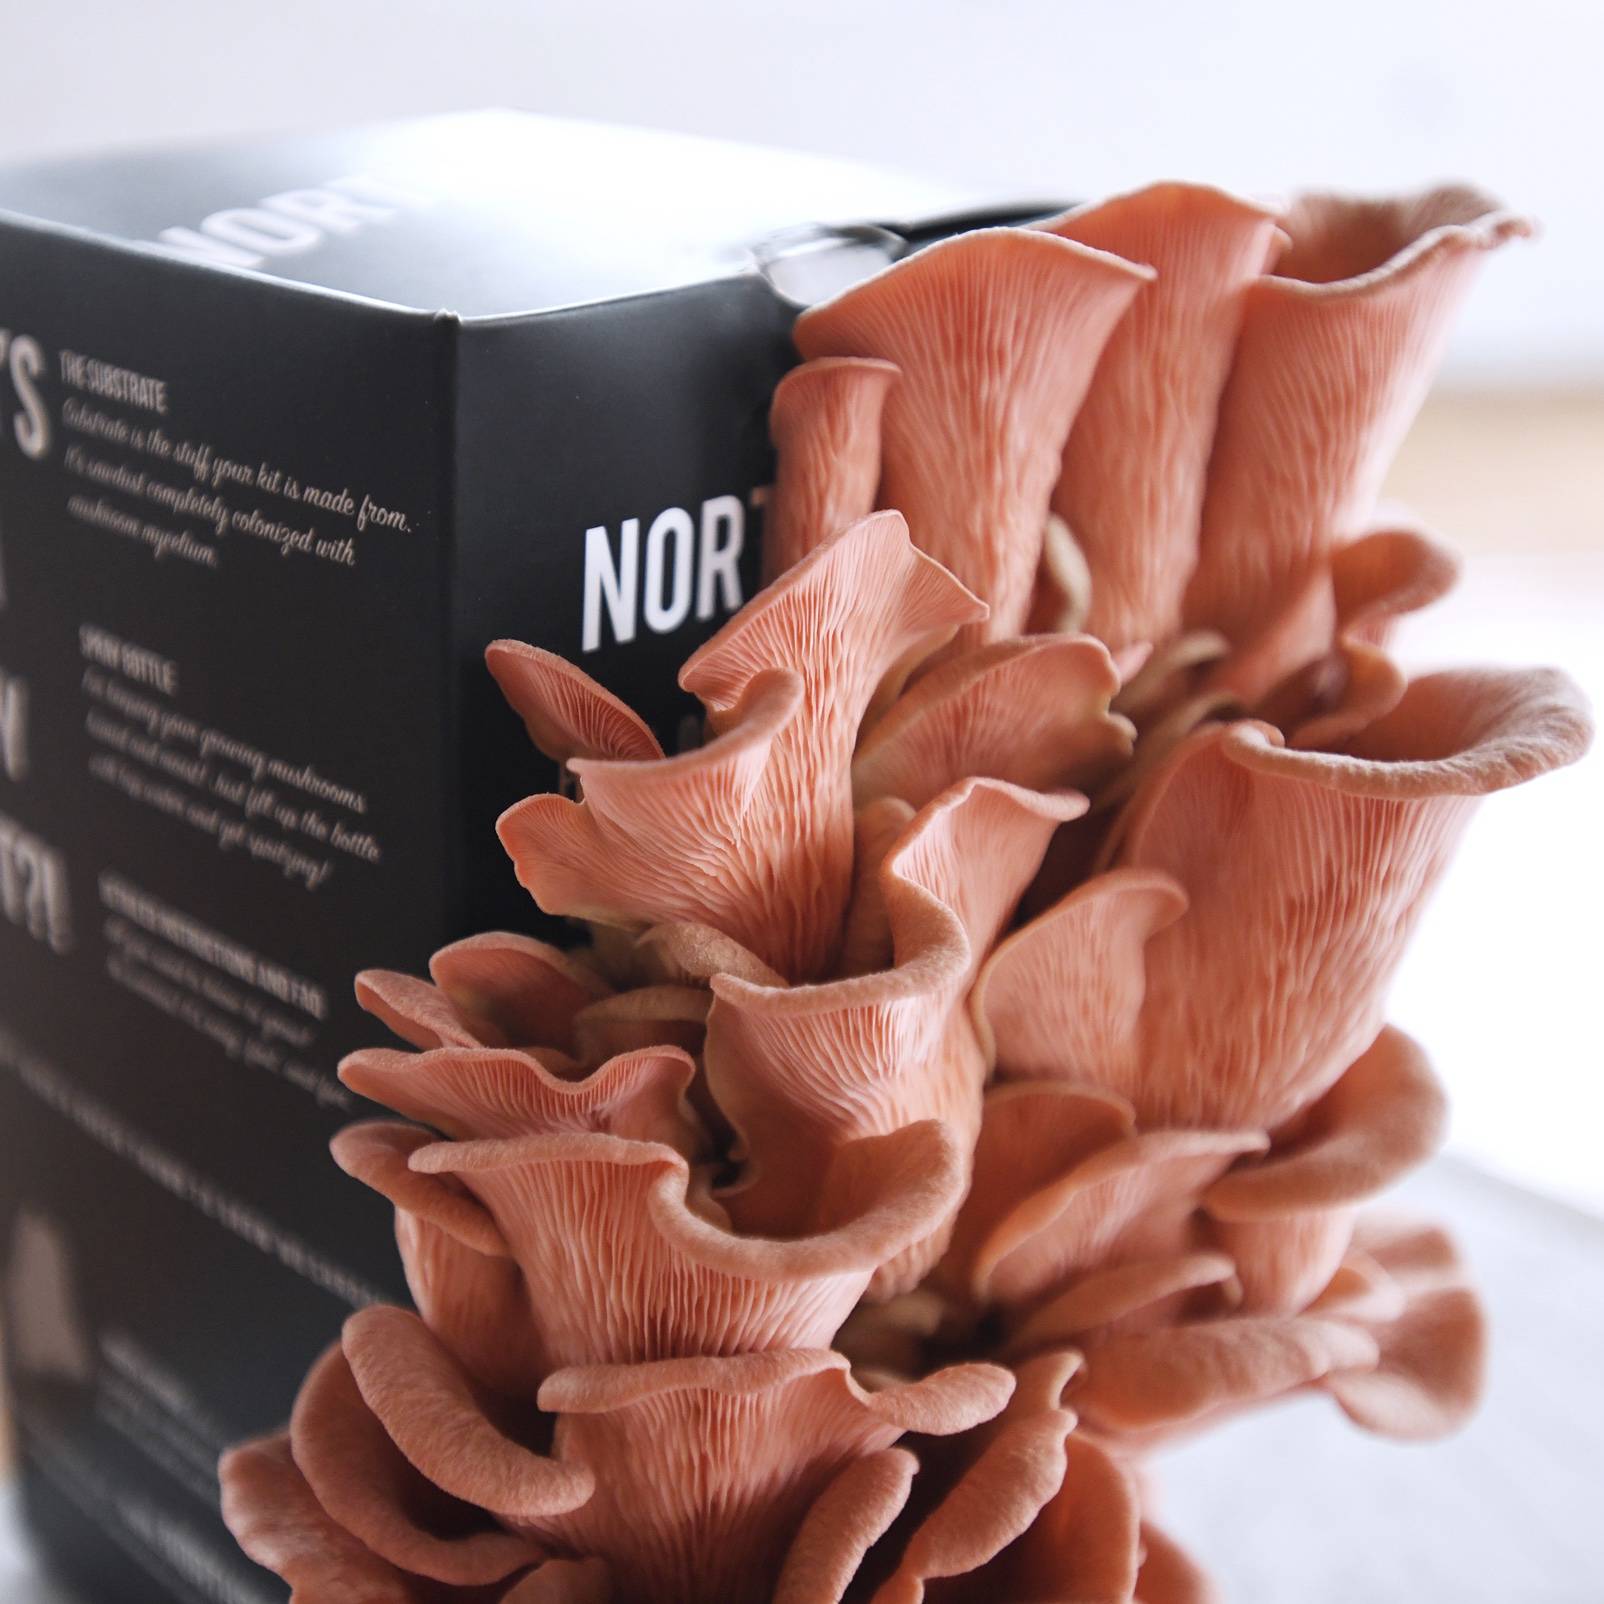 pink oyster mushrooms growing in a Spray & Grow kit